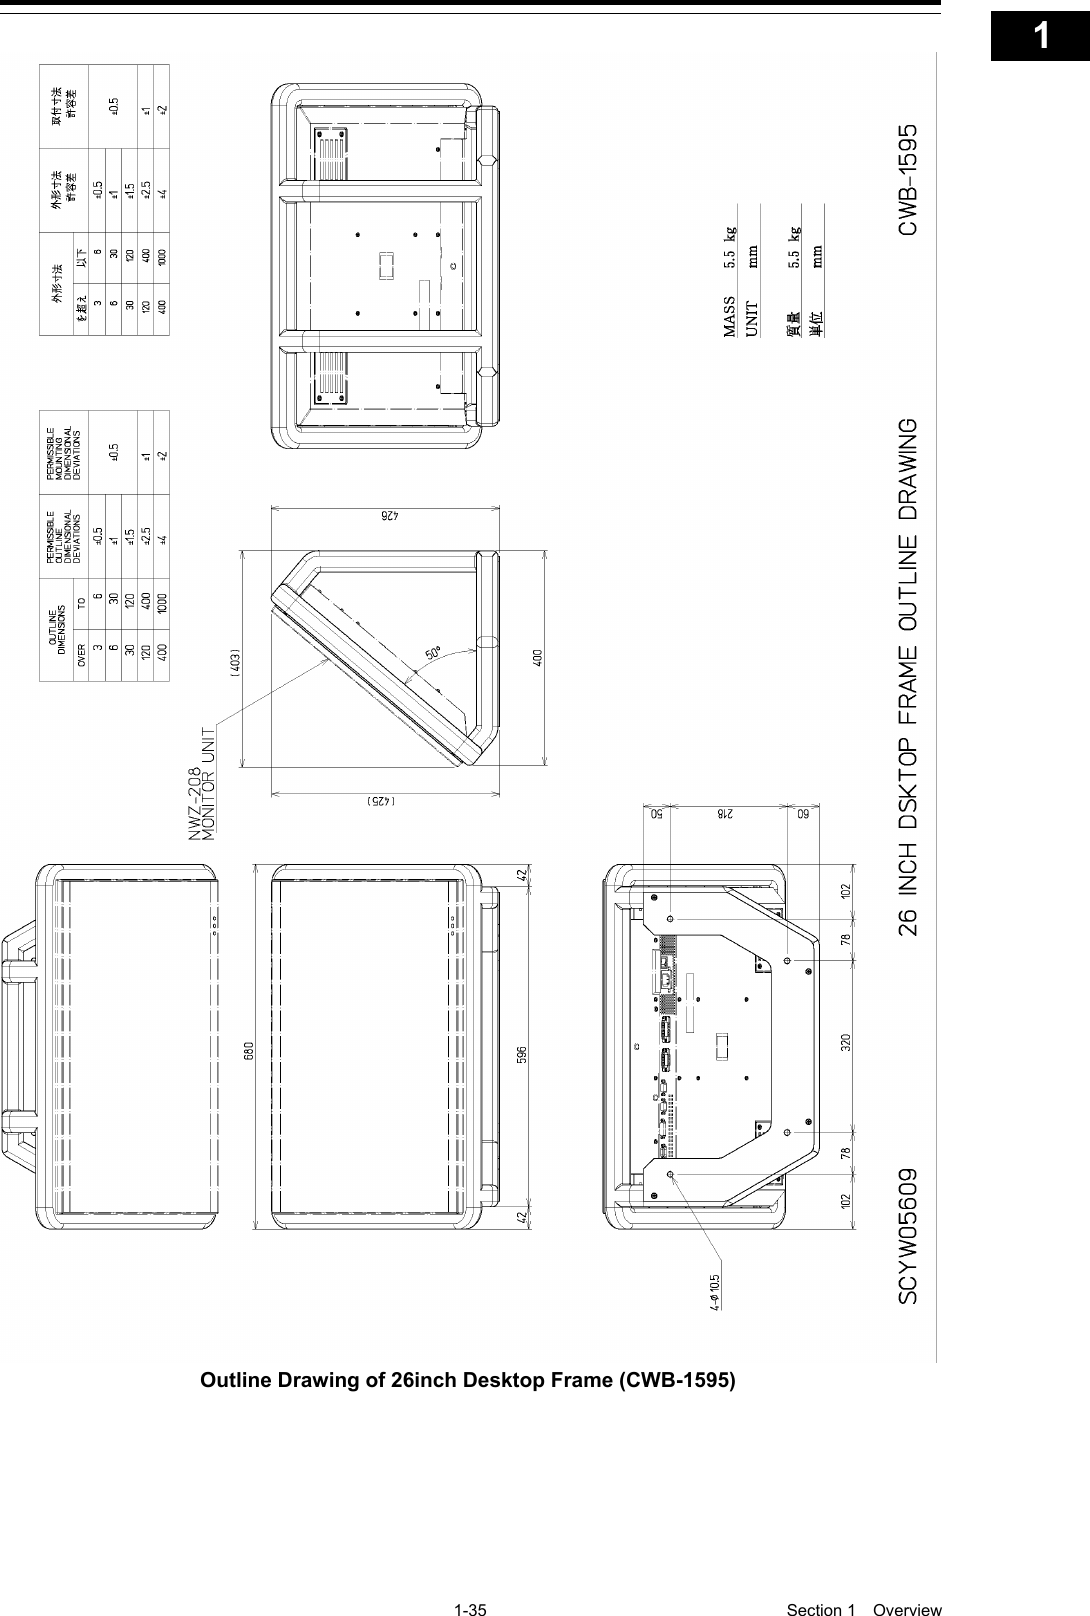   1-35  Section 1  Overview    1  2  3  4  5  6  7  8  9  10  11  12  13  14  15  16  17  18  19  20  21  22  23  24  25  26  27  付録     Outline Drawing of 26inch Desktop Frame (CWB-1595)  